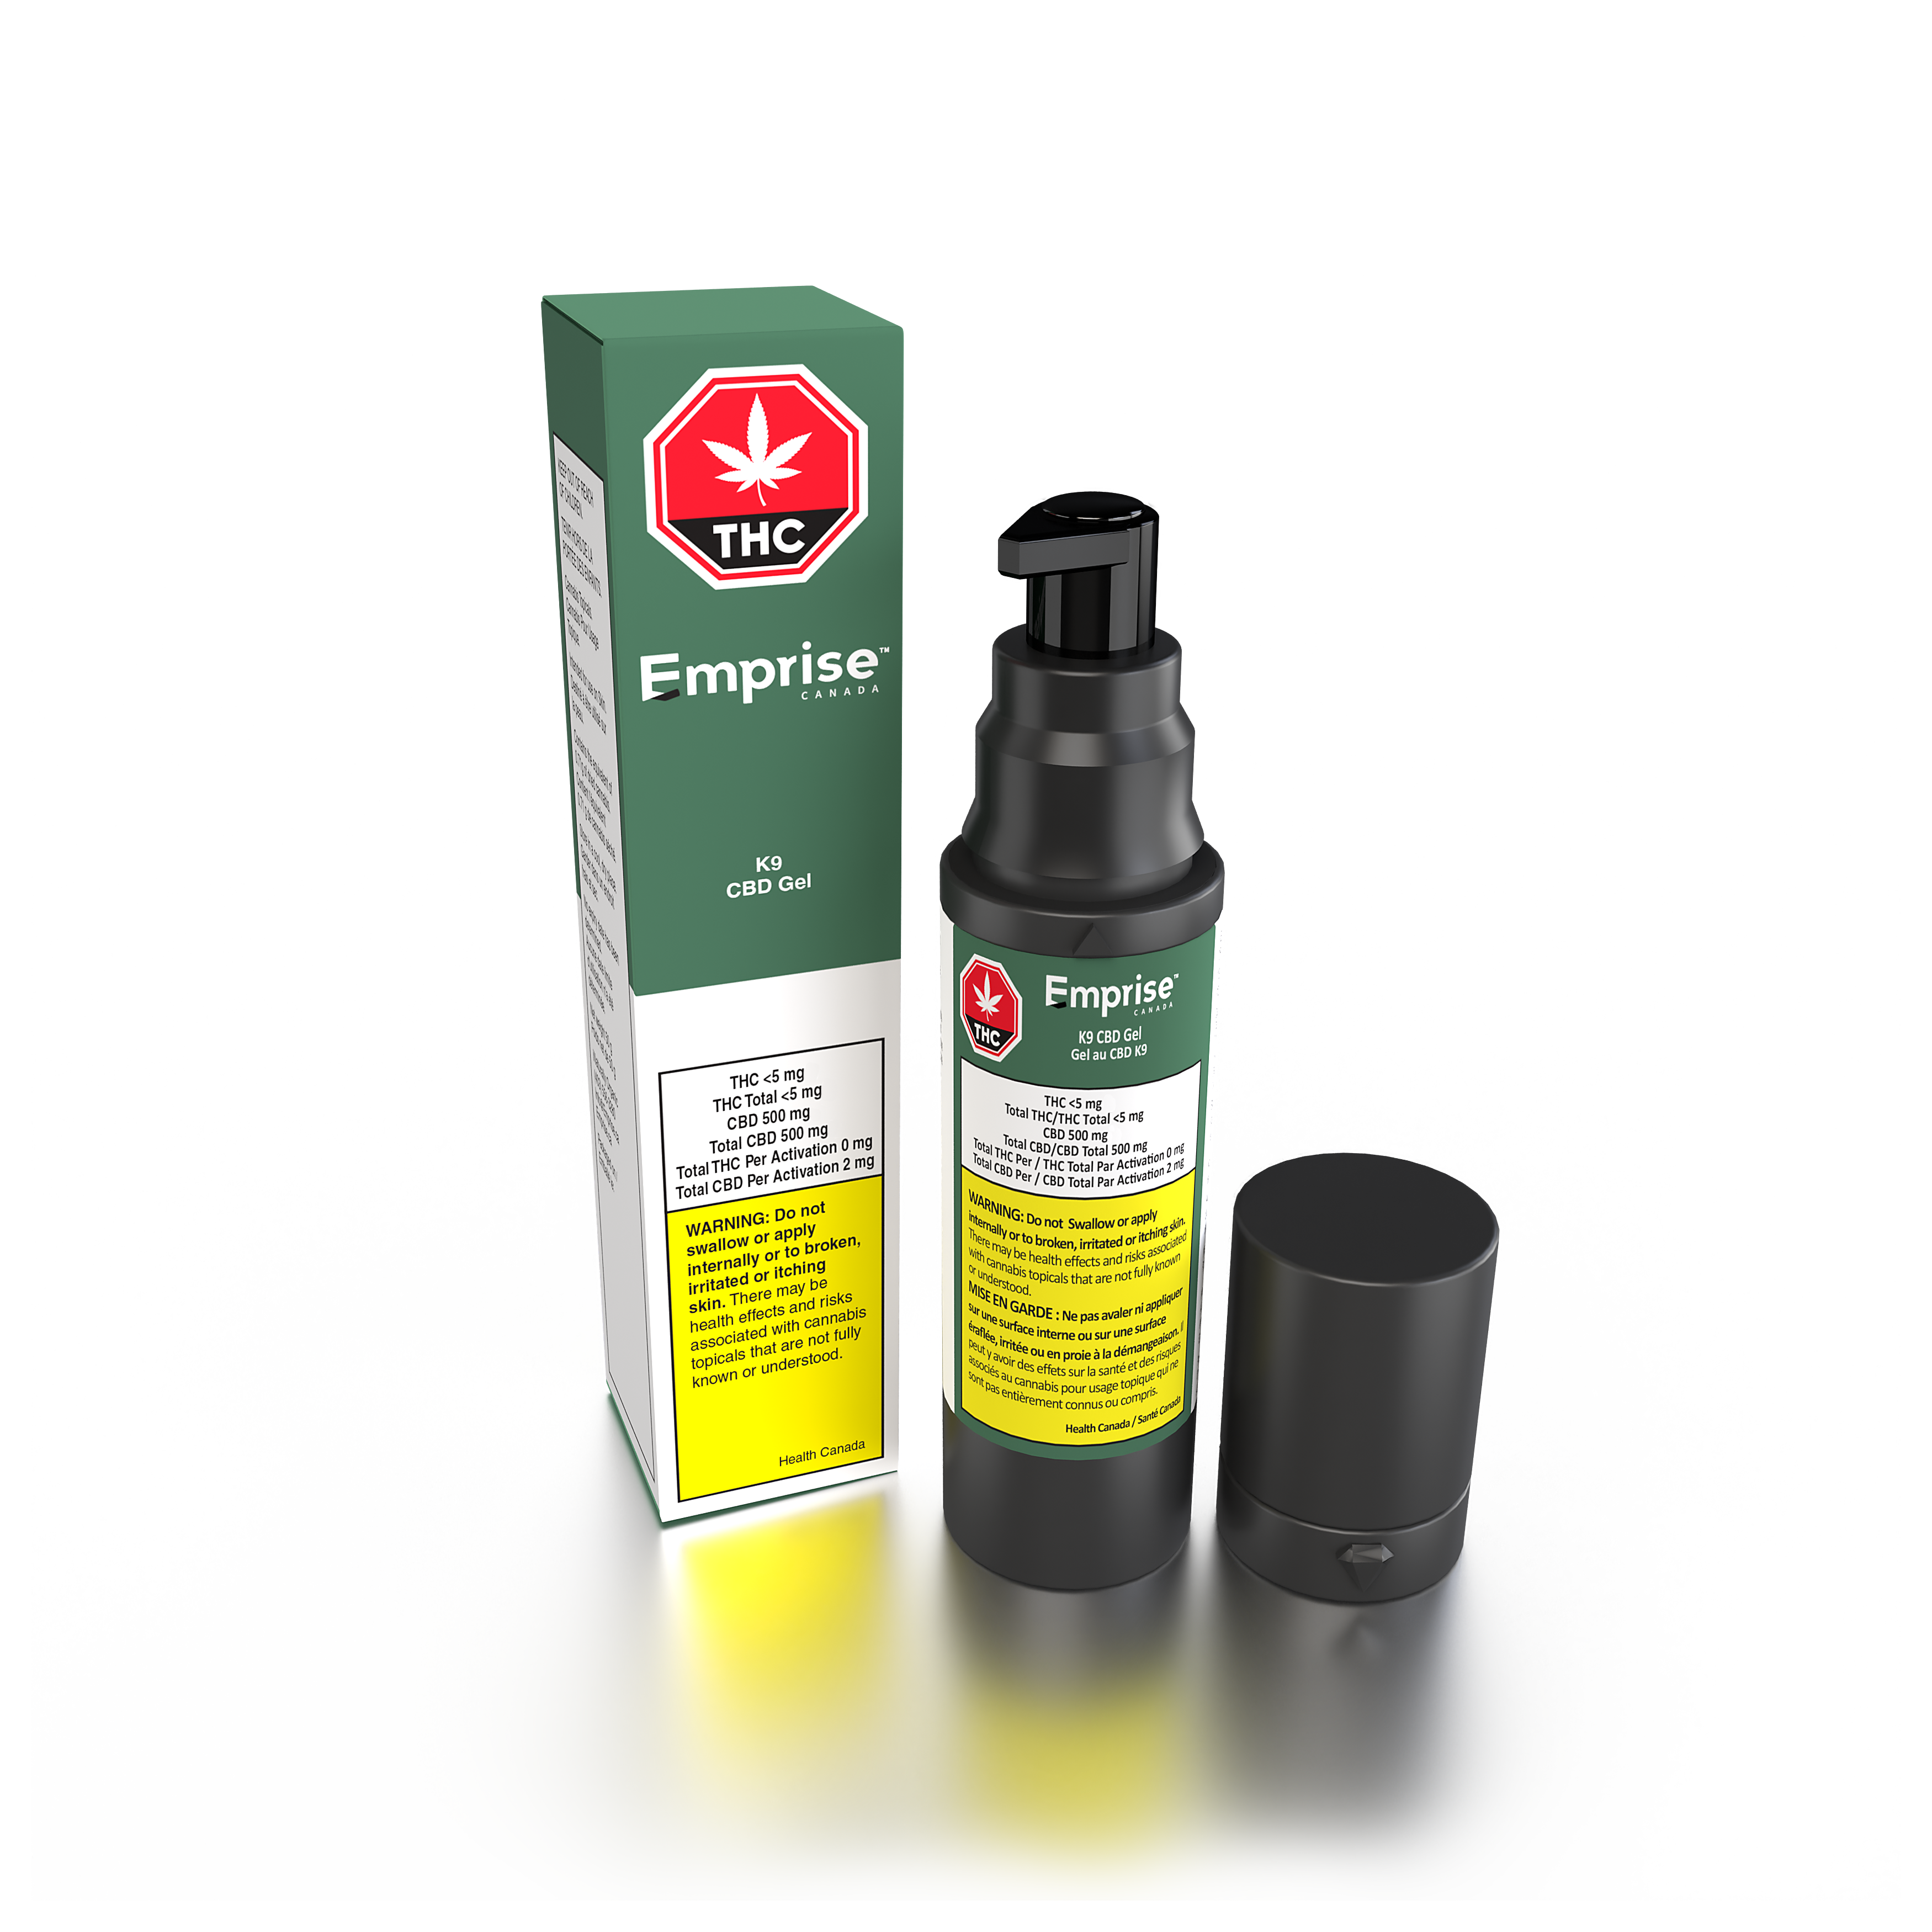 Cannabis Product K9 CBD Topical Gel 500mg CBD by Emprise Canada